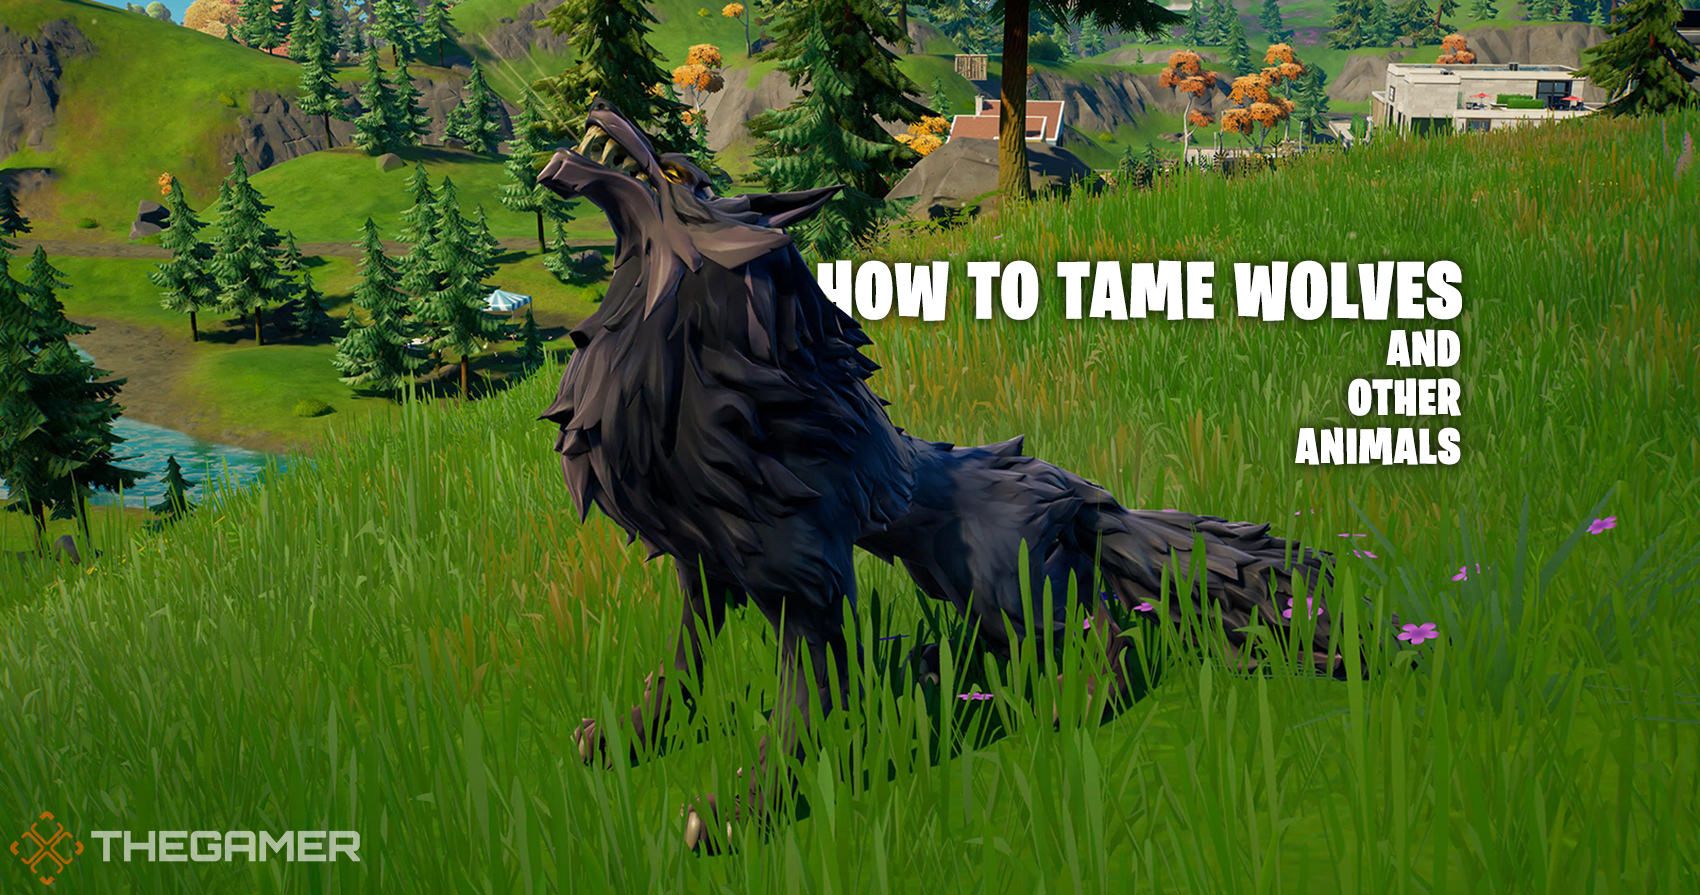 Fortnite: How To Tame Wolves And Other Animals In Fortnite Season 6 Primal